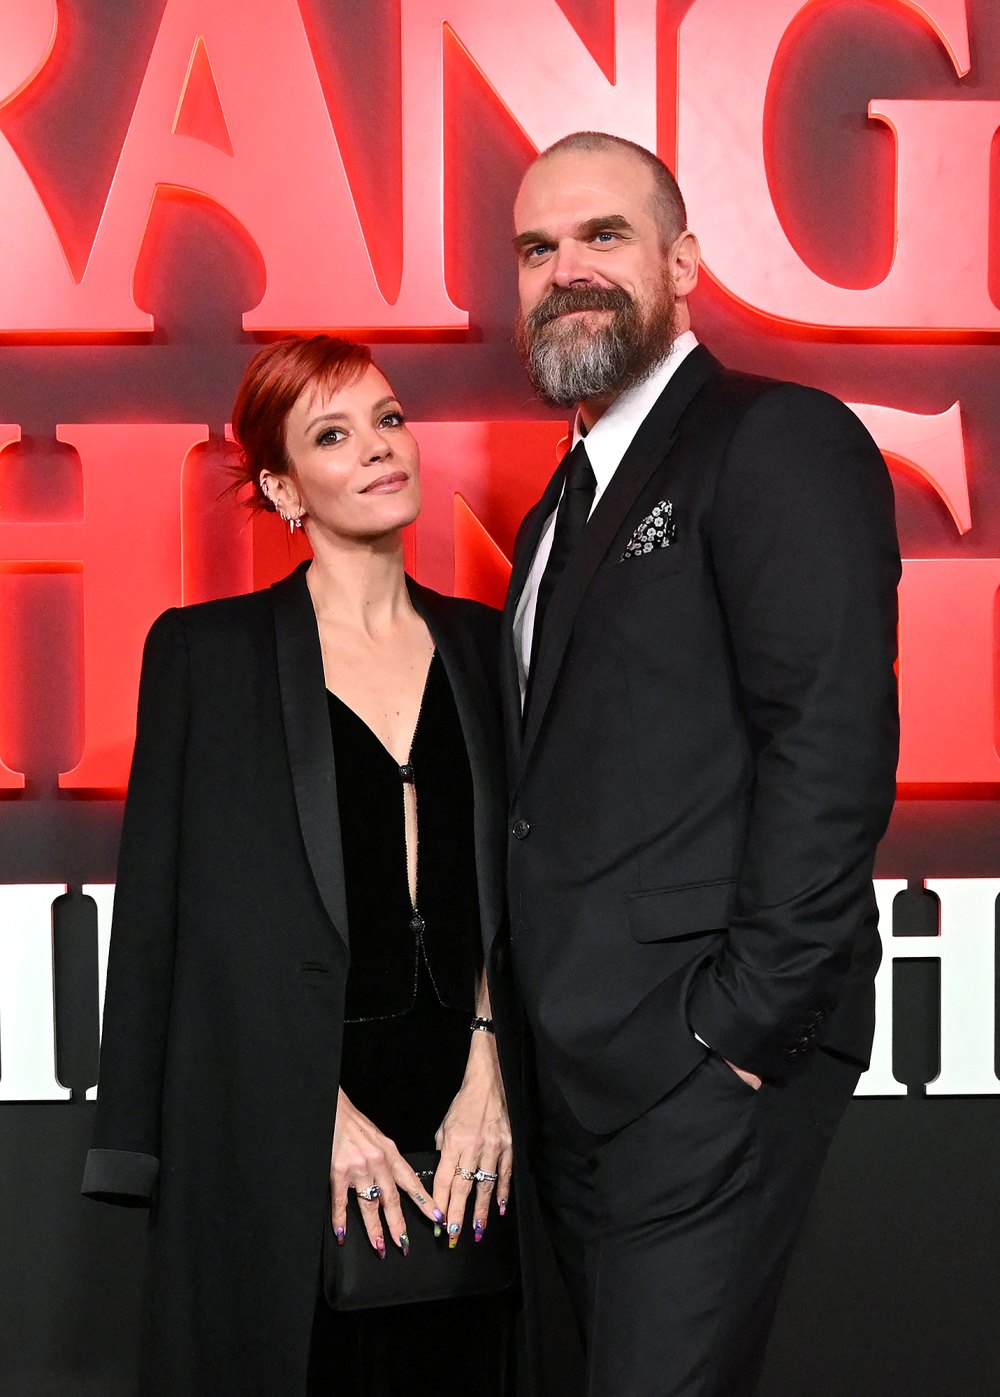 Why Lily Allen and David Harbour Are the ‘Caregiver’ for Each Other’s Smartphones